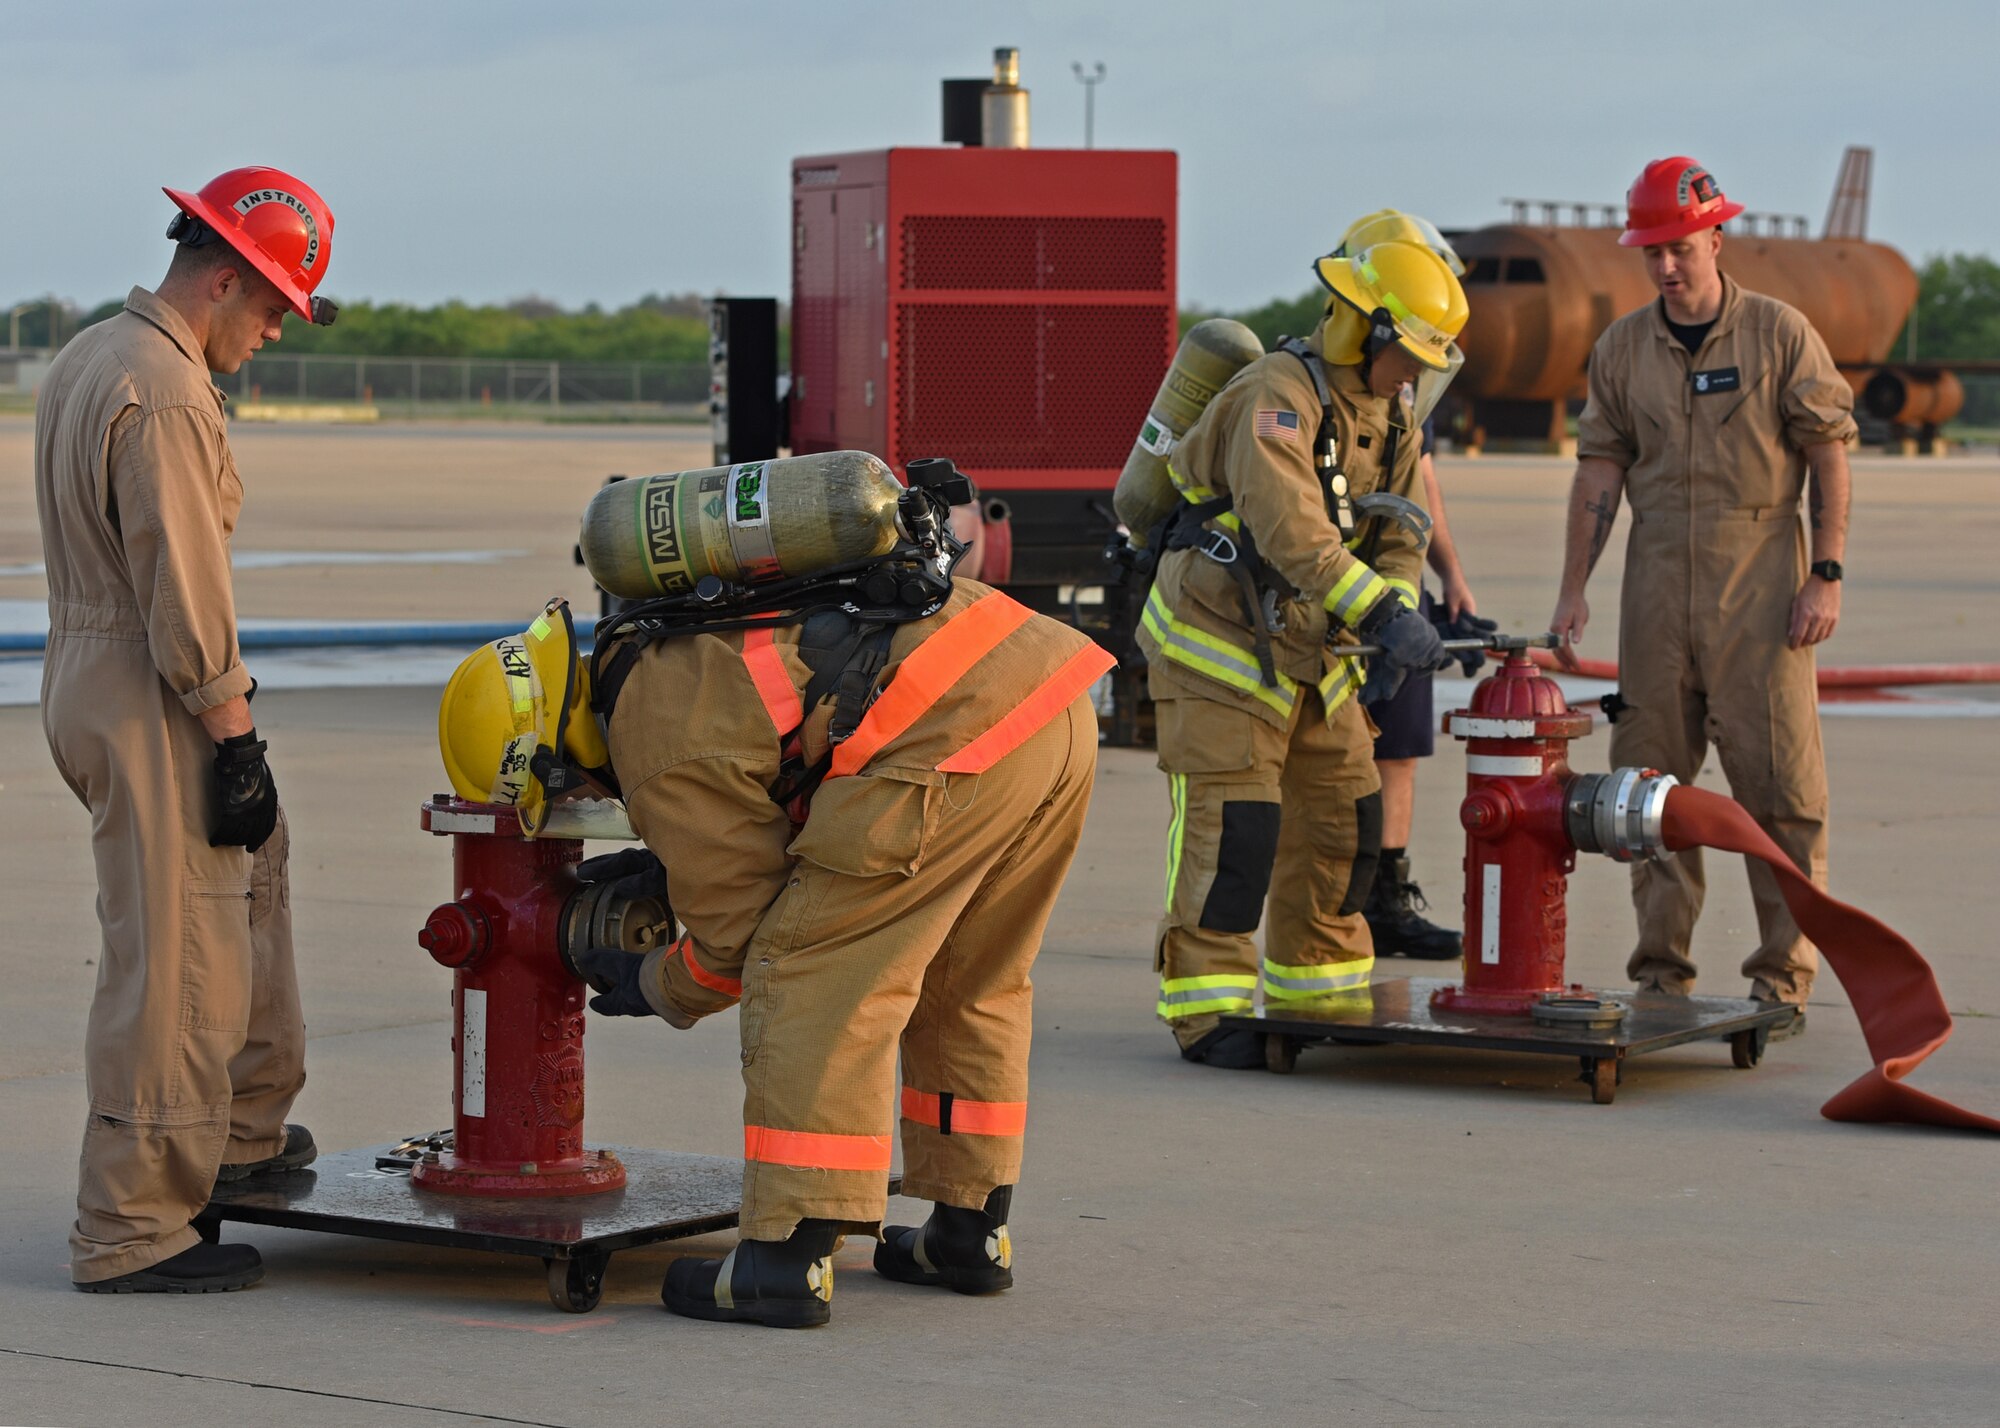 Joint service fire protection students from the 312th Training Squadron attach hoses to fire hydrants during their training on Goodfellow Air Force Base, Texas, June 11, 2021. Students were timed on how quickly they could carry the 200 foot fire hose and attach it to the fire hydrant. (U.S. Air Force photo by Senior Airman Abbey Rieves)